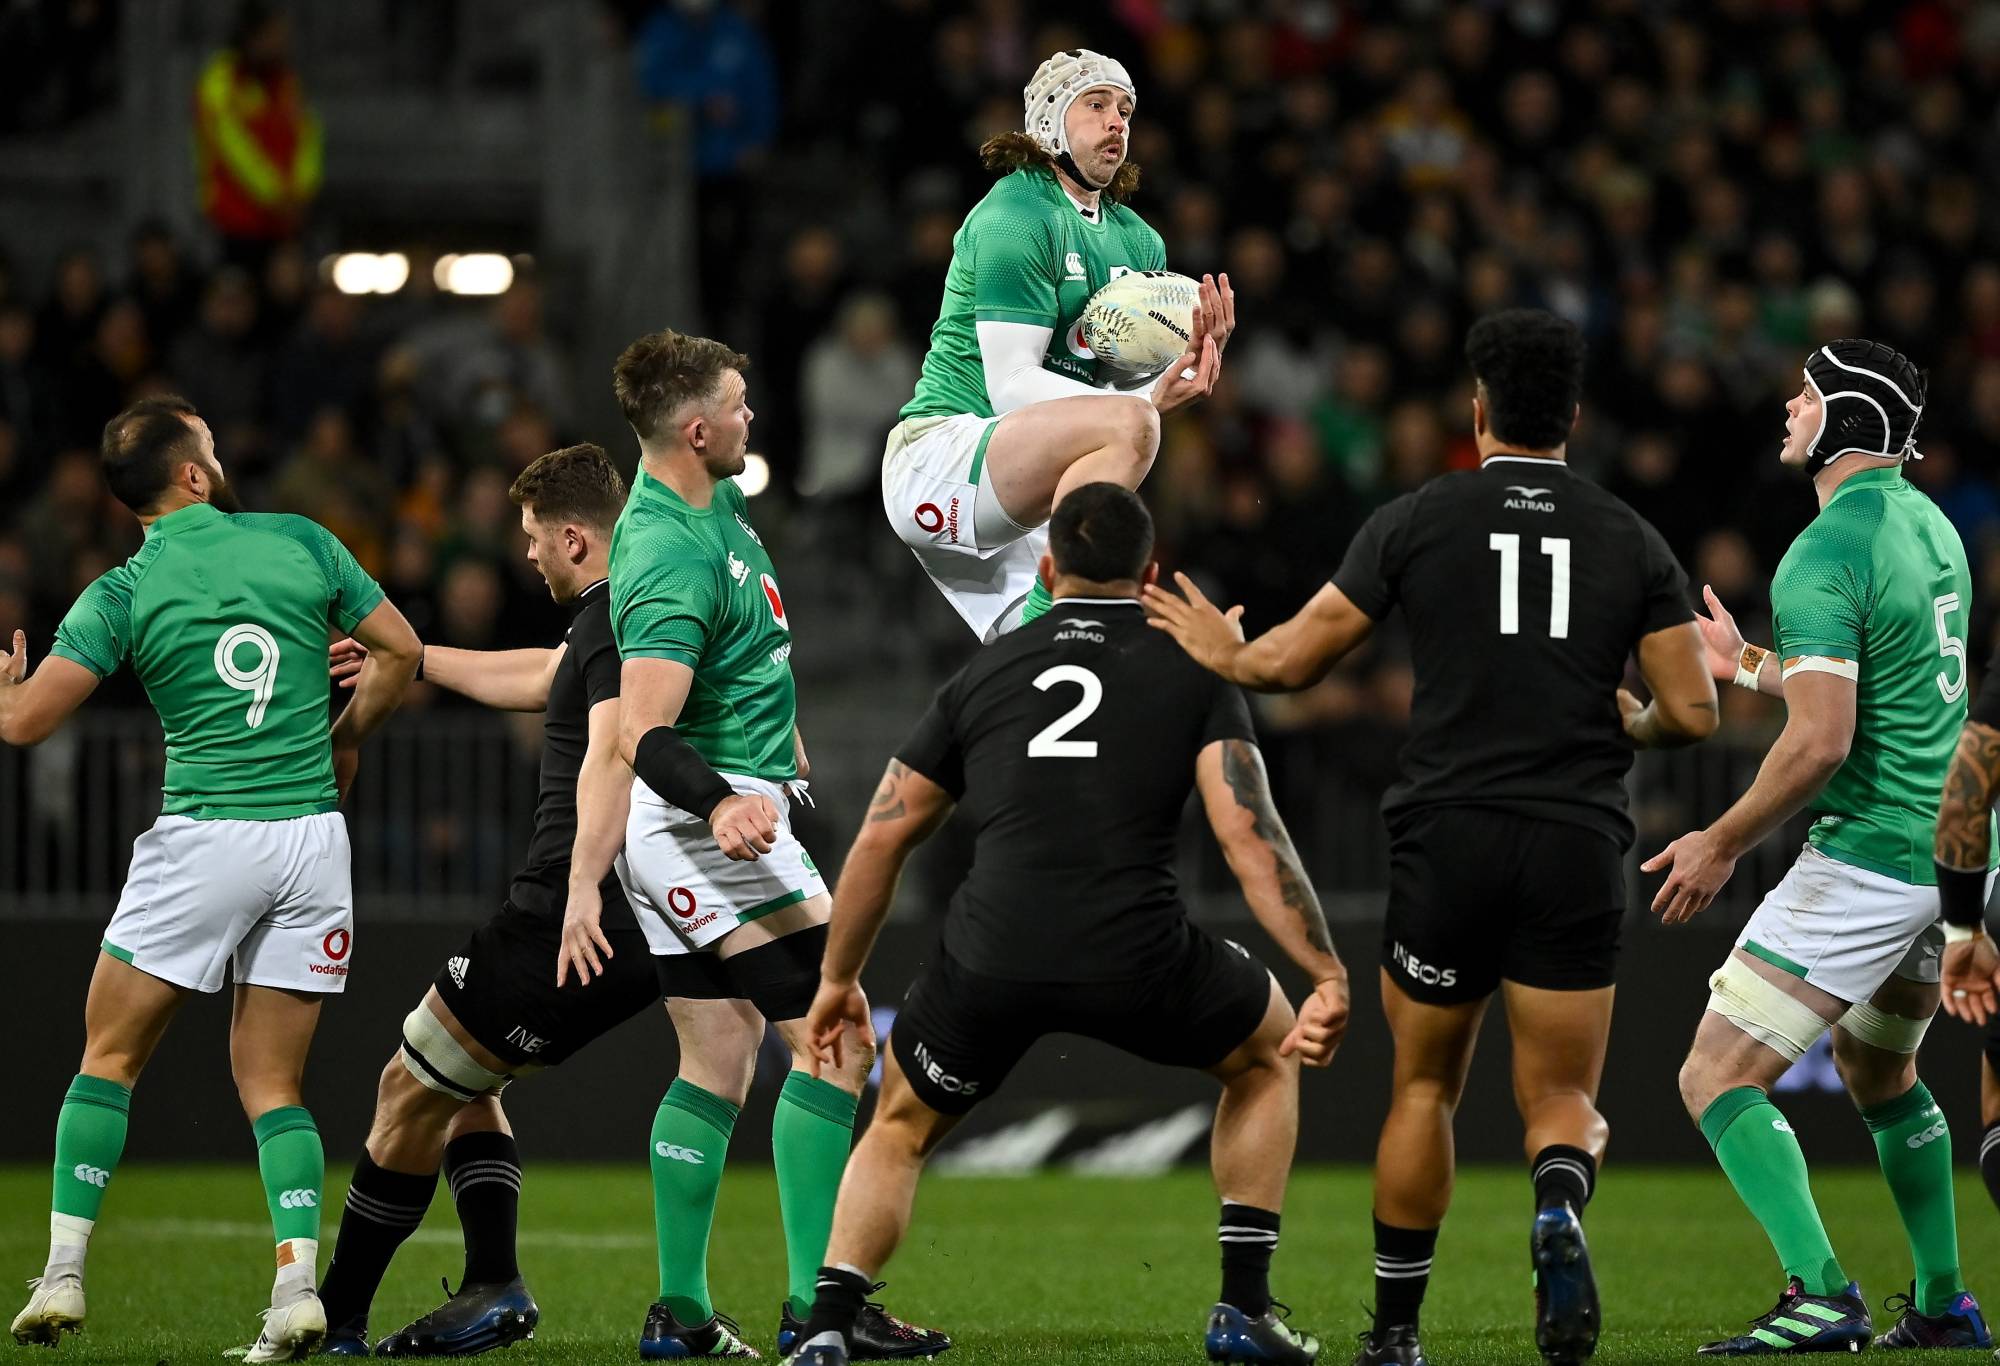 Mack Hansen of Ireland wins possession from a high ball during the Steinlager Series match between New Zealand and Ireland at the Forsyth Barr Stadium in Dunedin, New Zealand. (Photo By Brendan Moran/Sportsfile via Getty Images)